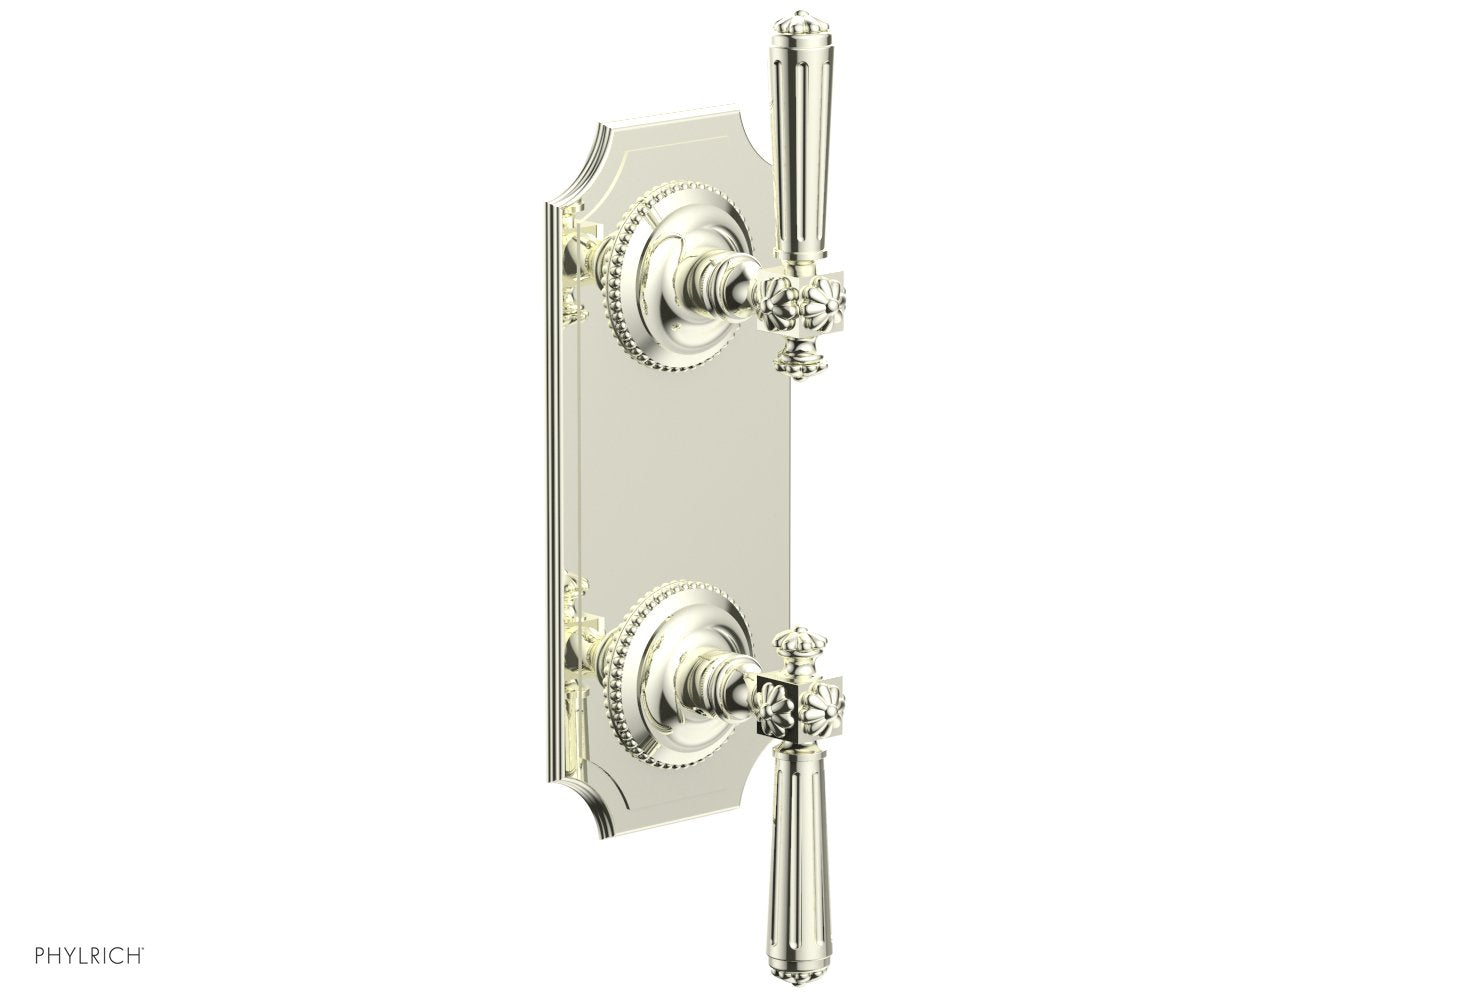 Phylrich MARVELLE Thermostatic Valve with Volume Control or Diverter